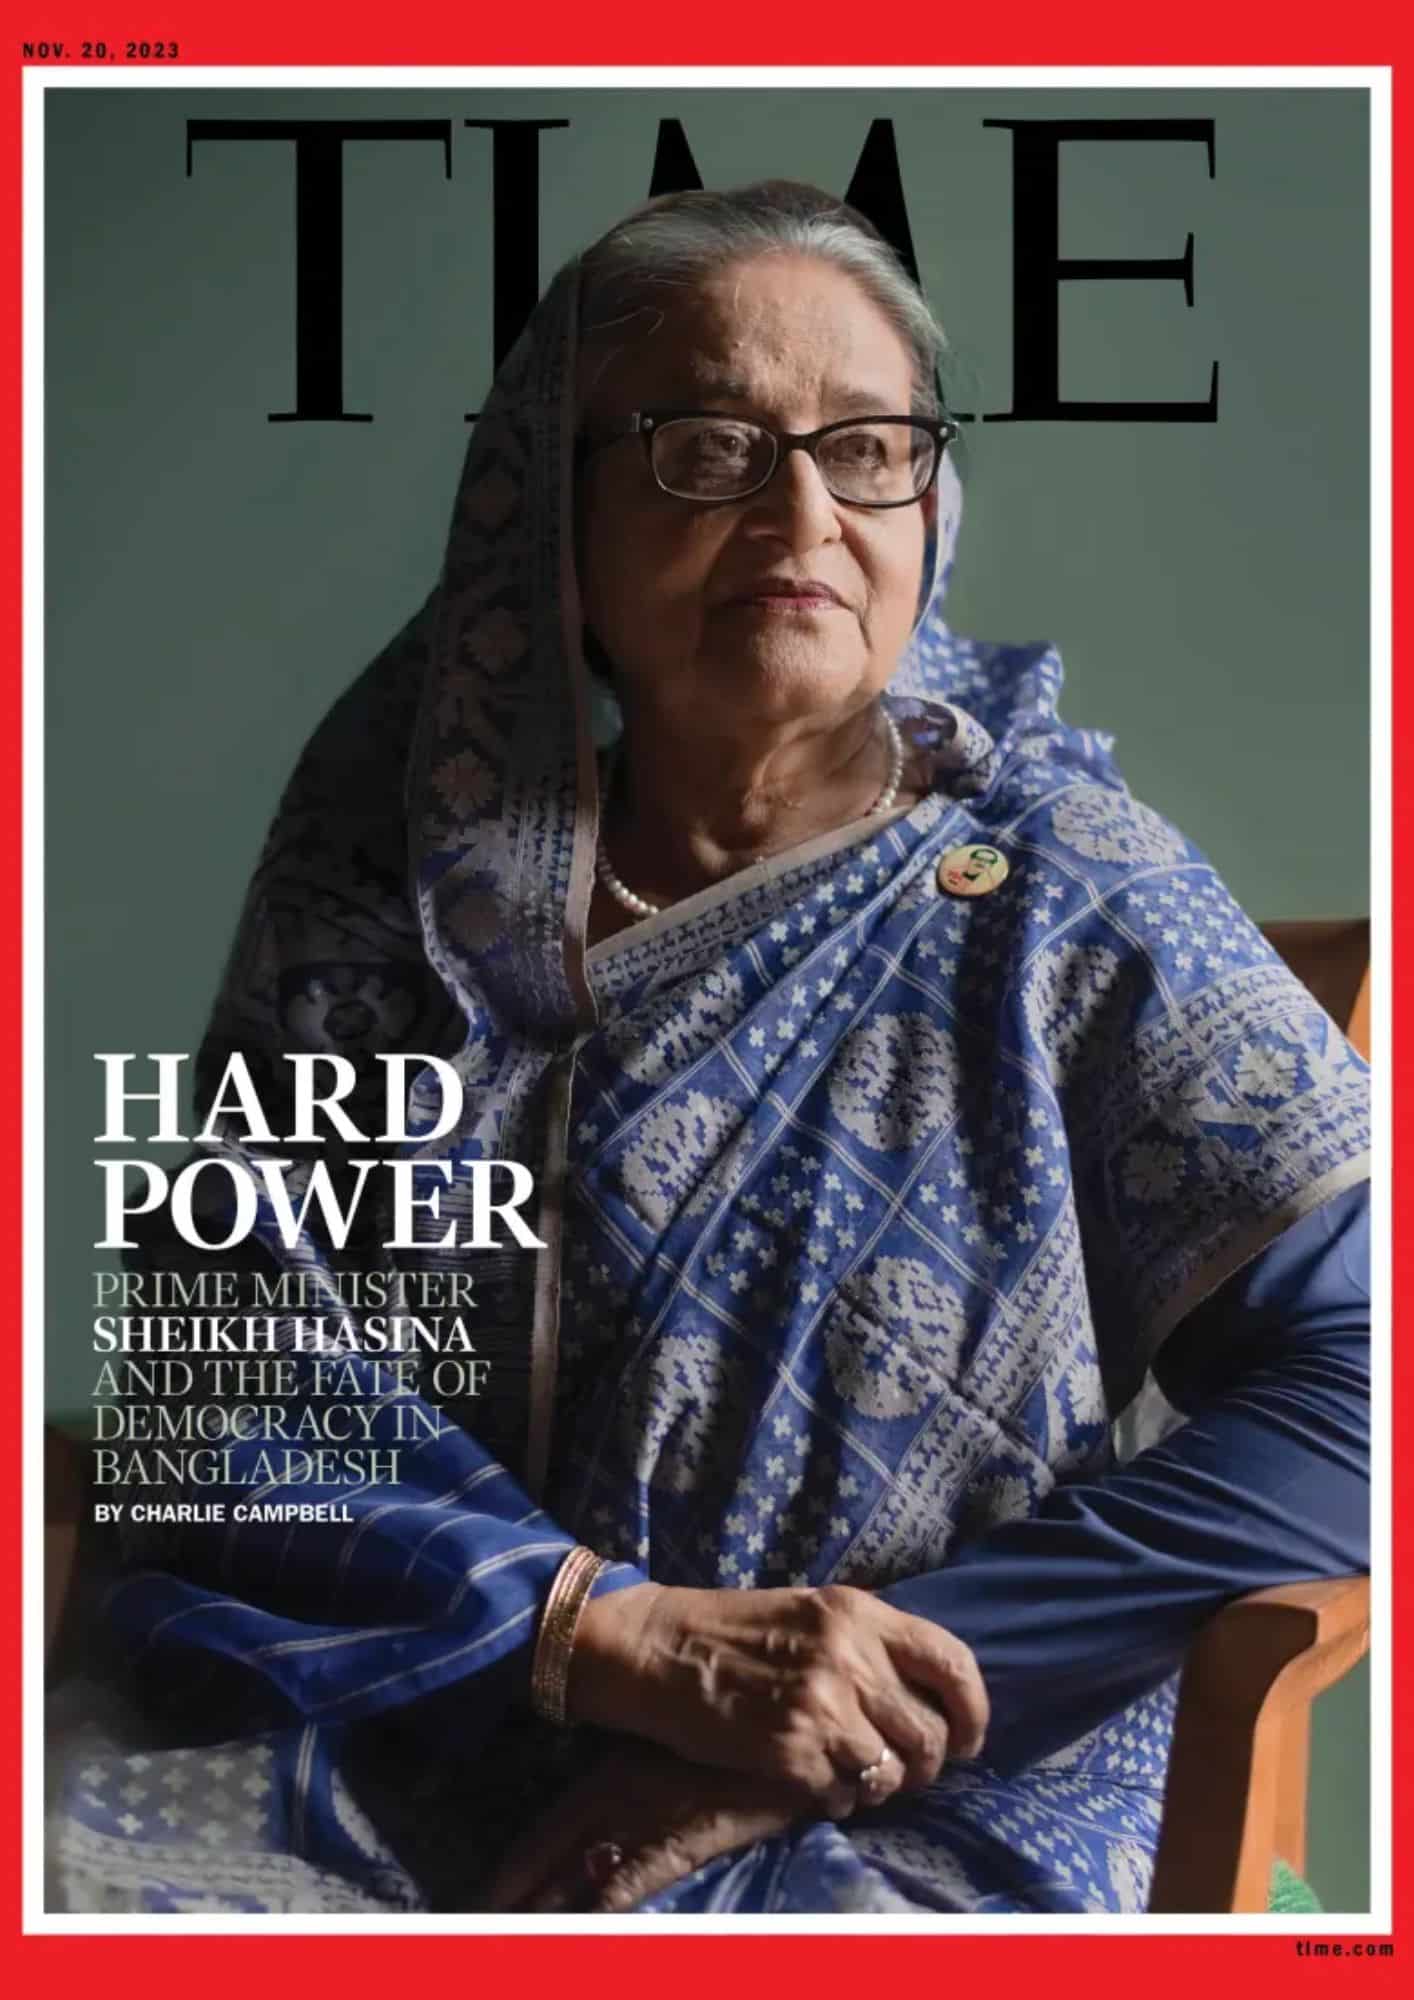 Sheikh Hasina graces the cover of Time magazine 